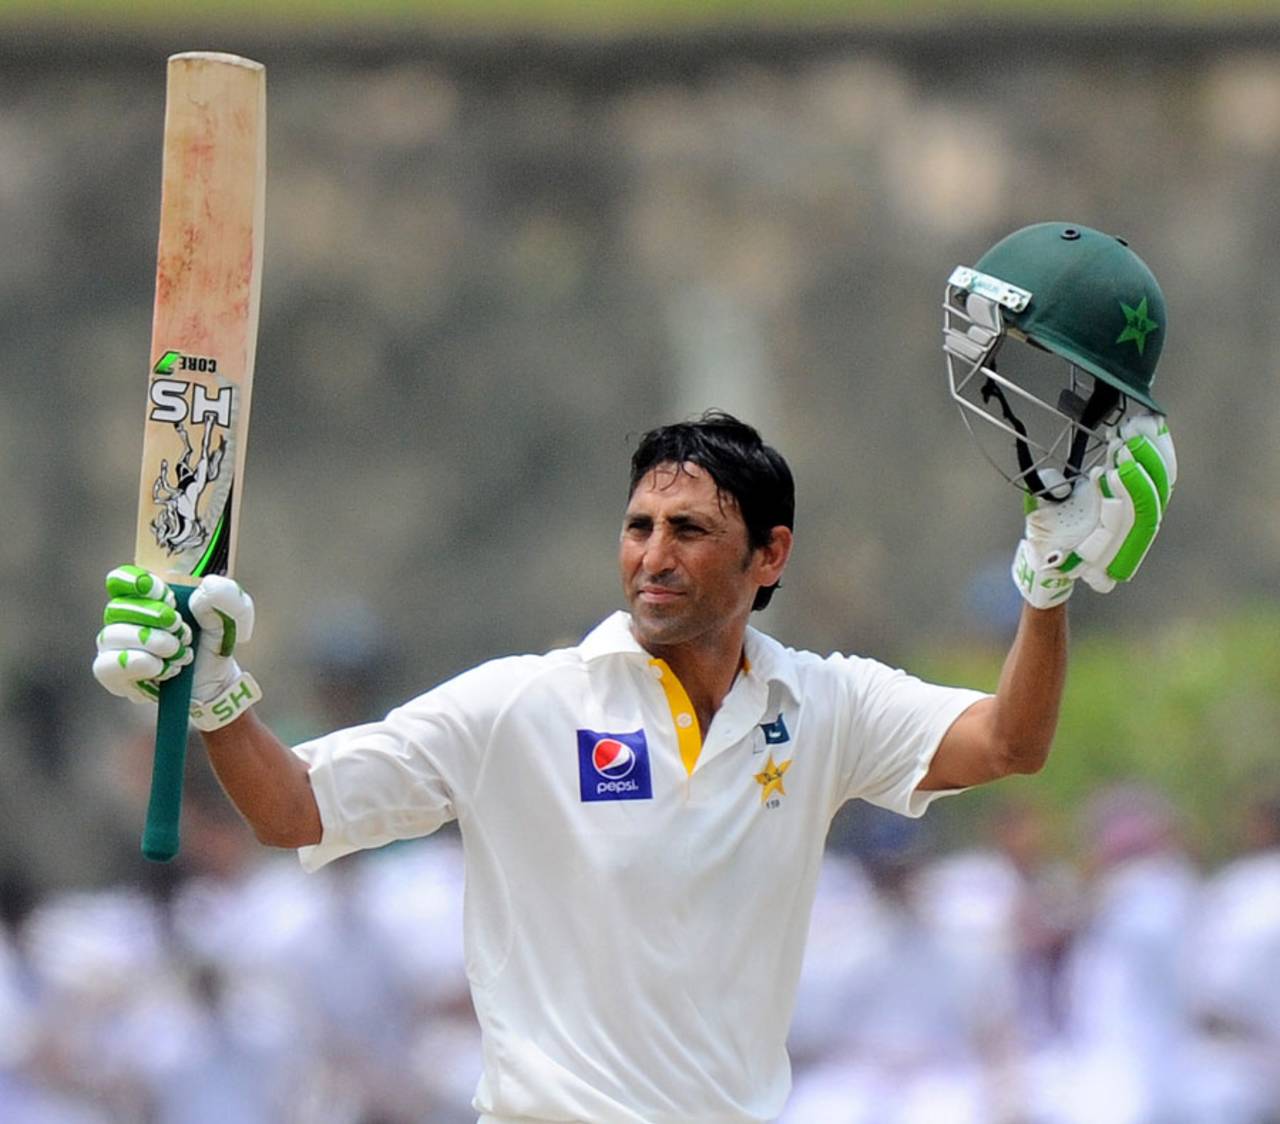 Younis Khan signals his 150, Sri Lanka v Pakistan, 1st Test, Galle, 2nd day, August 7, 2014